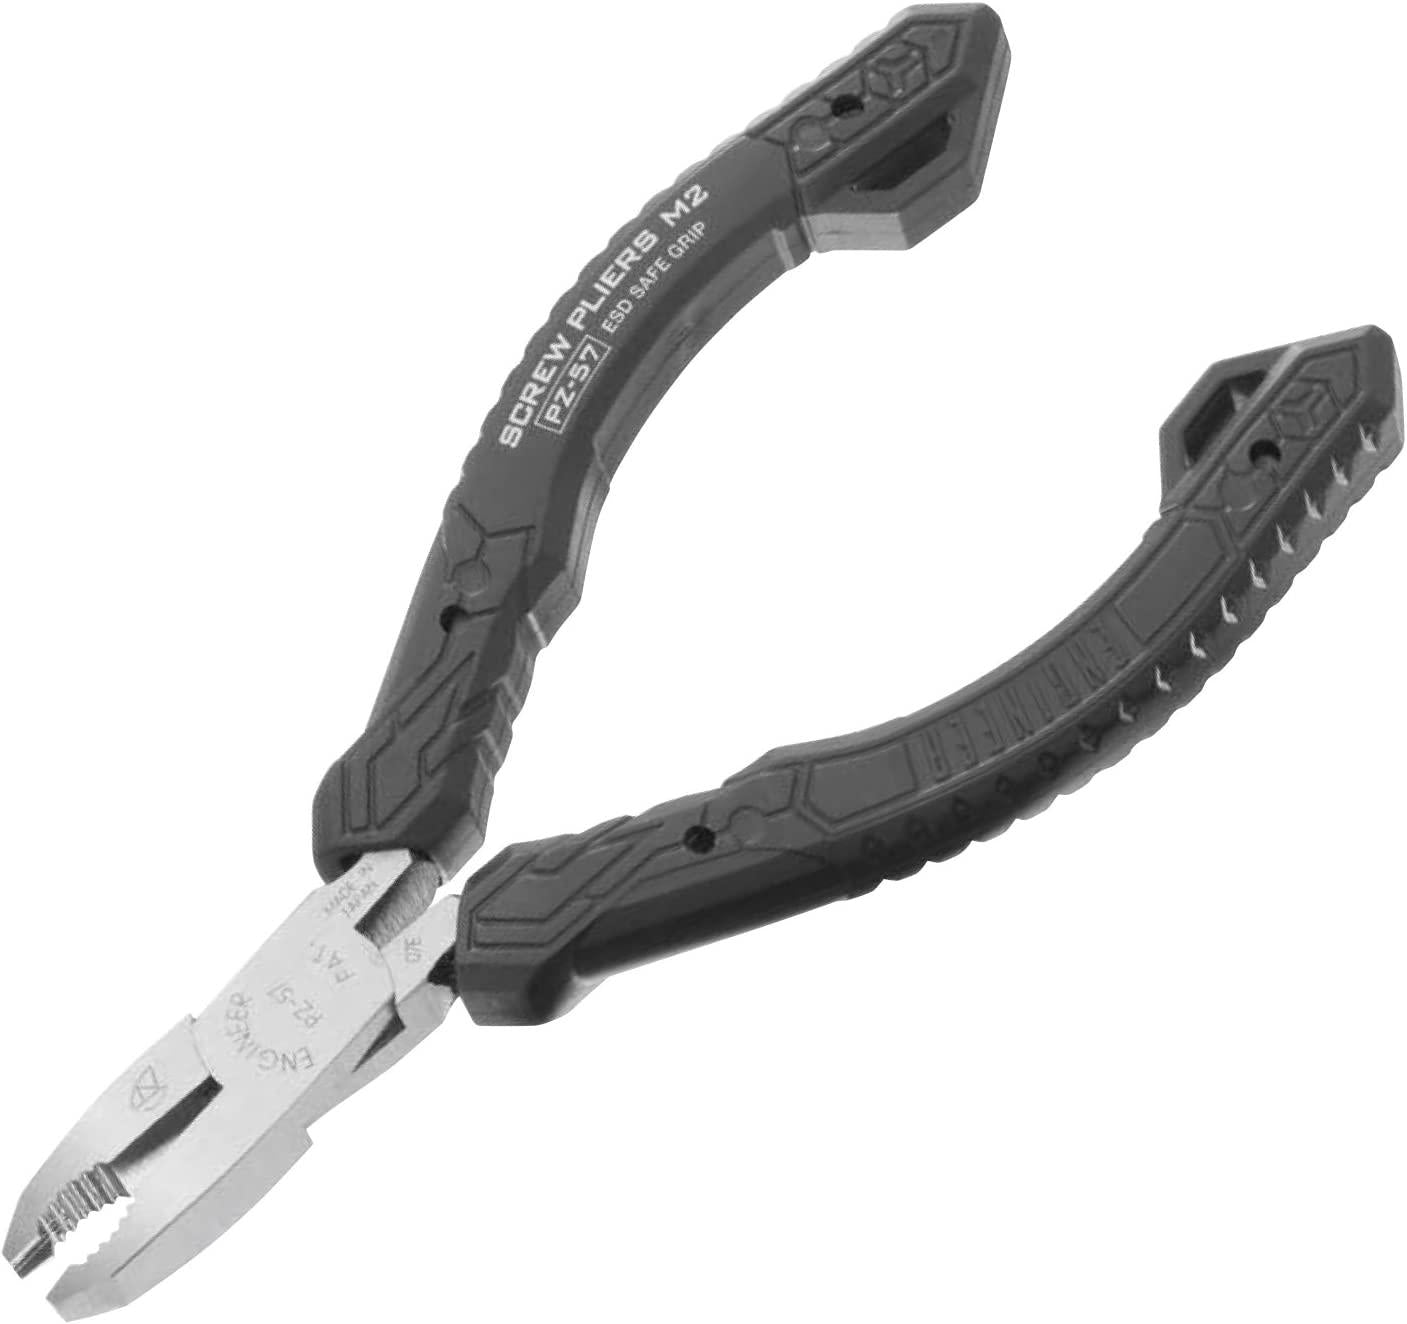 ENGINEER, ENGINEER PZ-57 120mm Screw Removal Pliers with unique vertical serrated jaws for tiny M2 screws (Screw Head dia. 2 3.5mm), ESD-safe, Made in Japan